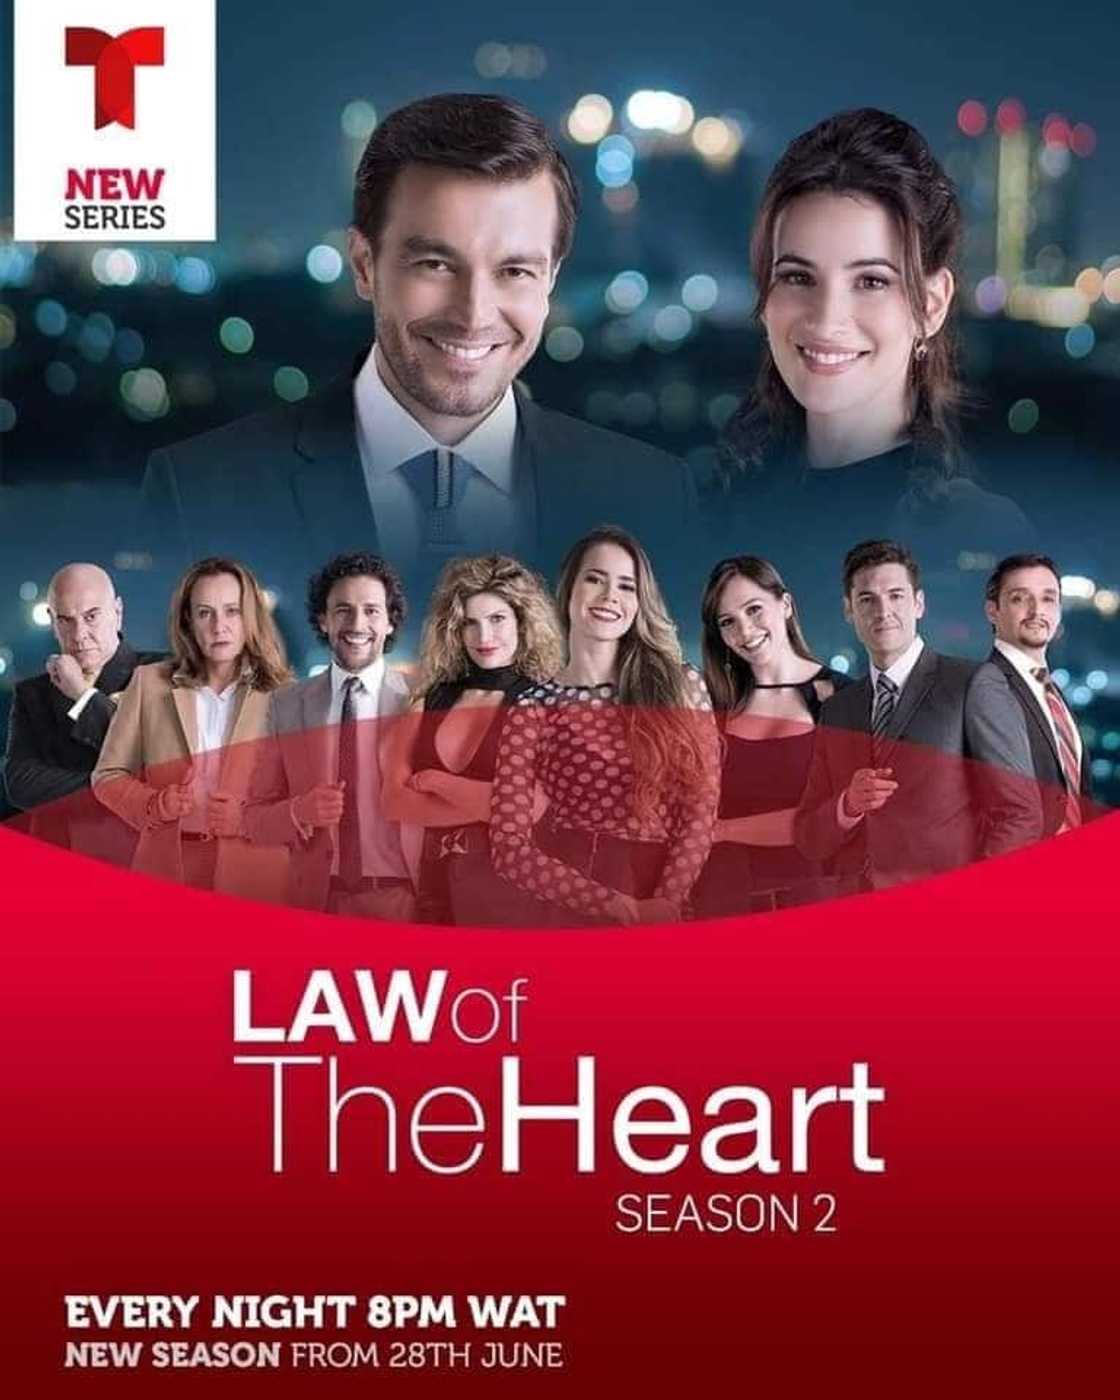 Law of the Heart 2 episodes